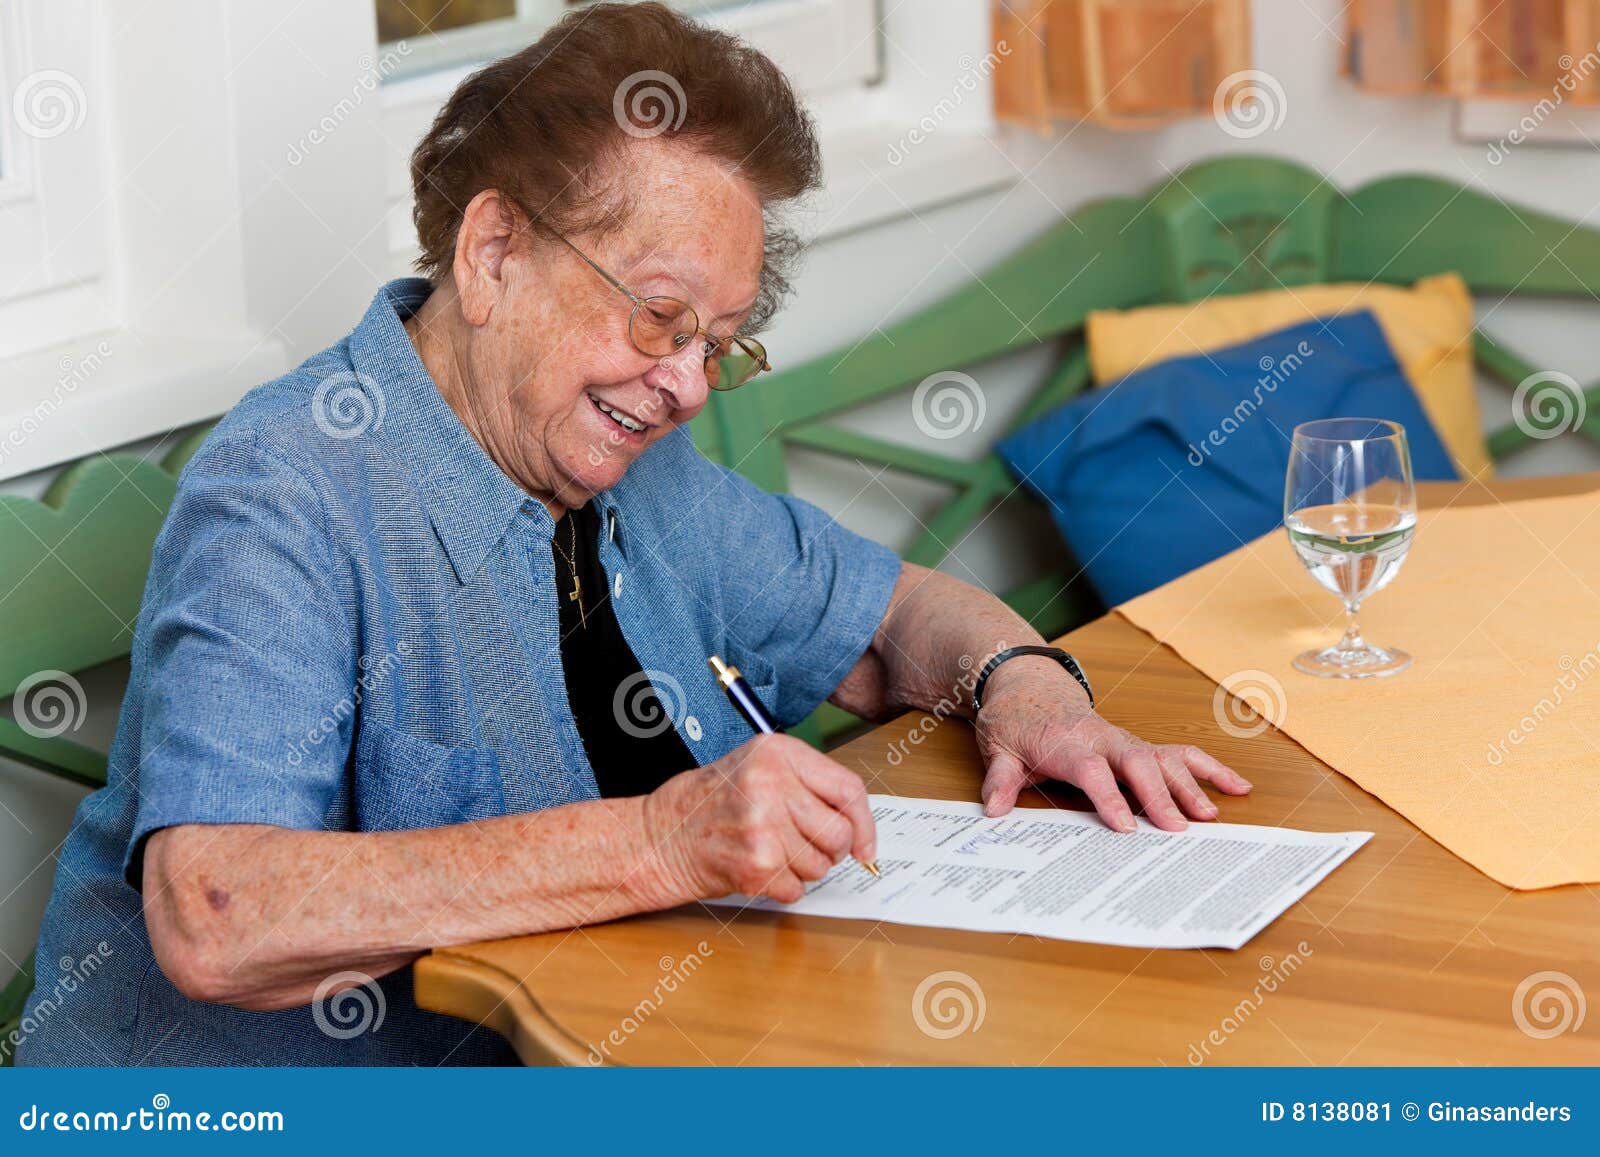 Senior signs a contract stock image. Image of lapse, icons - 8138081